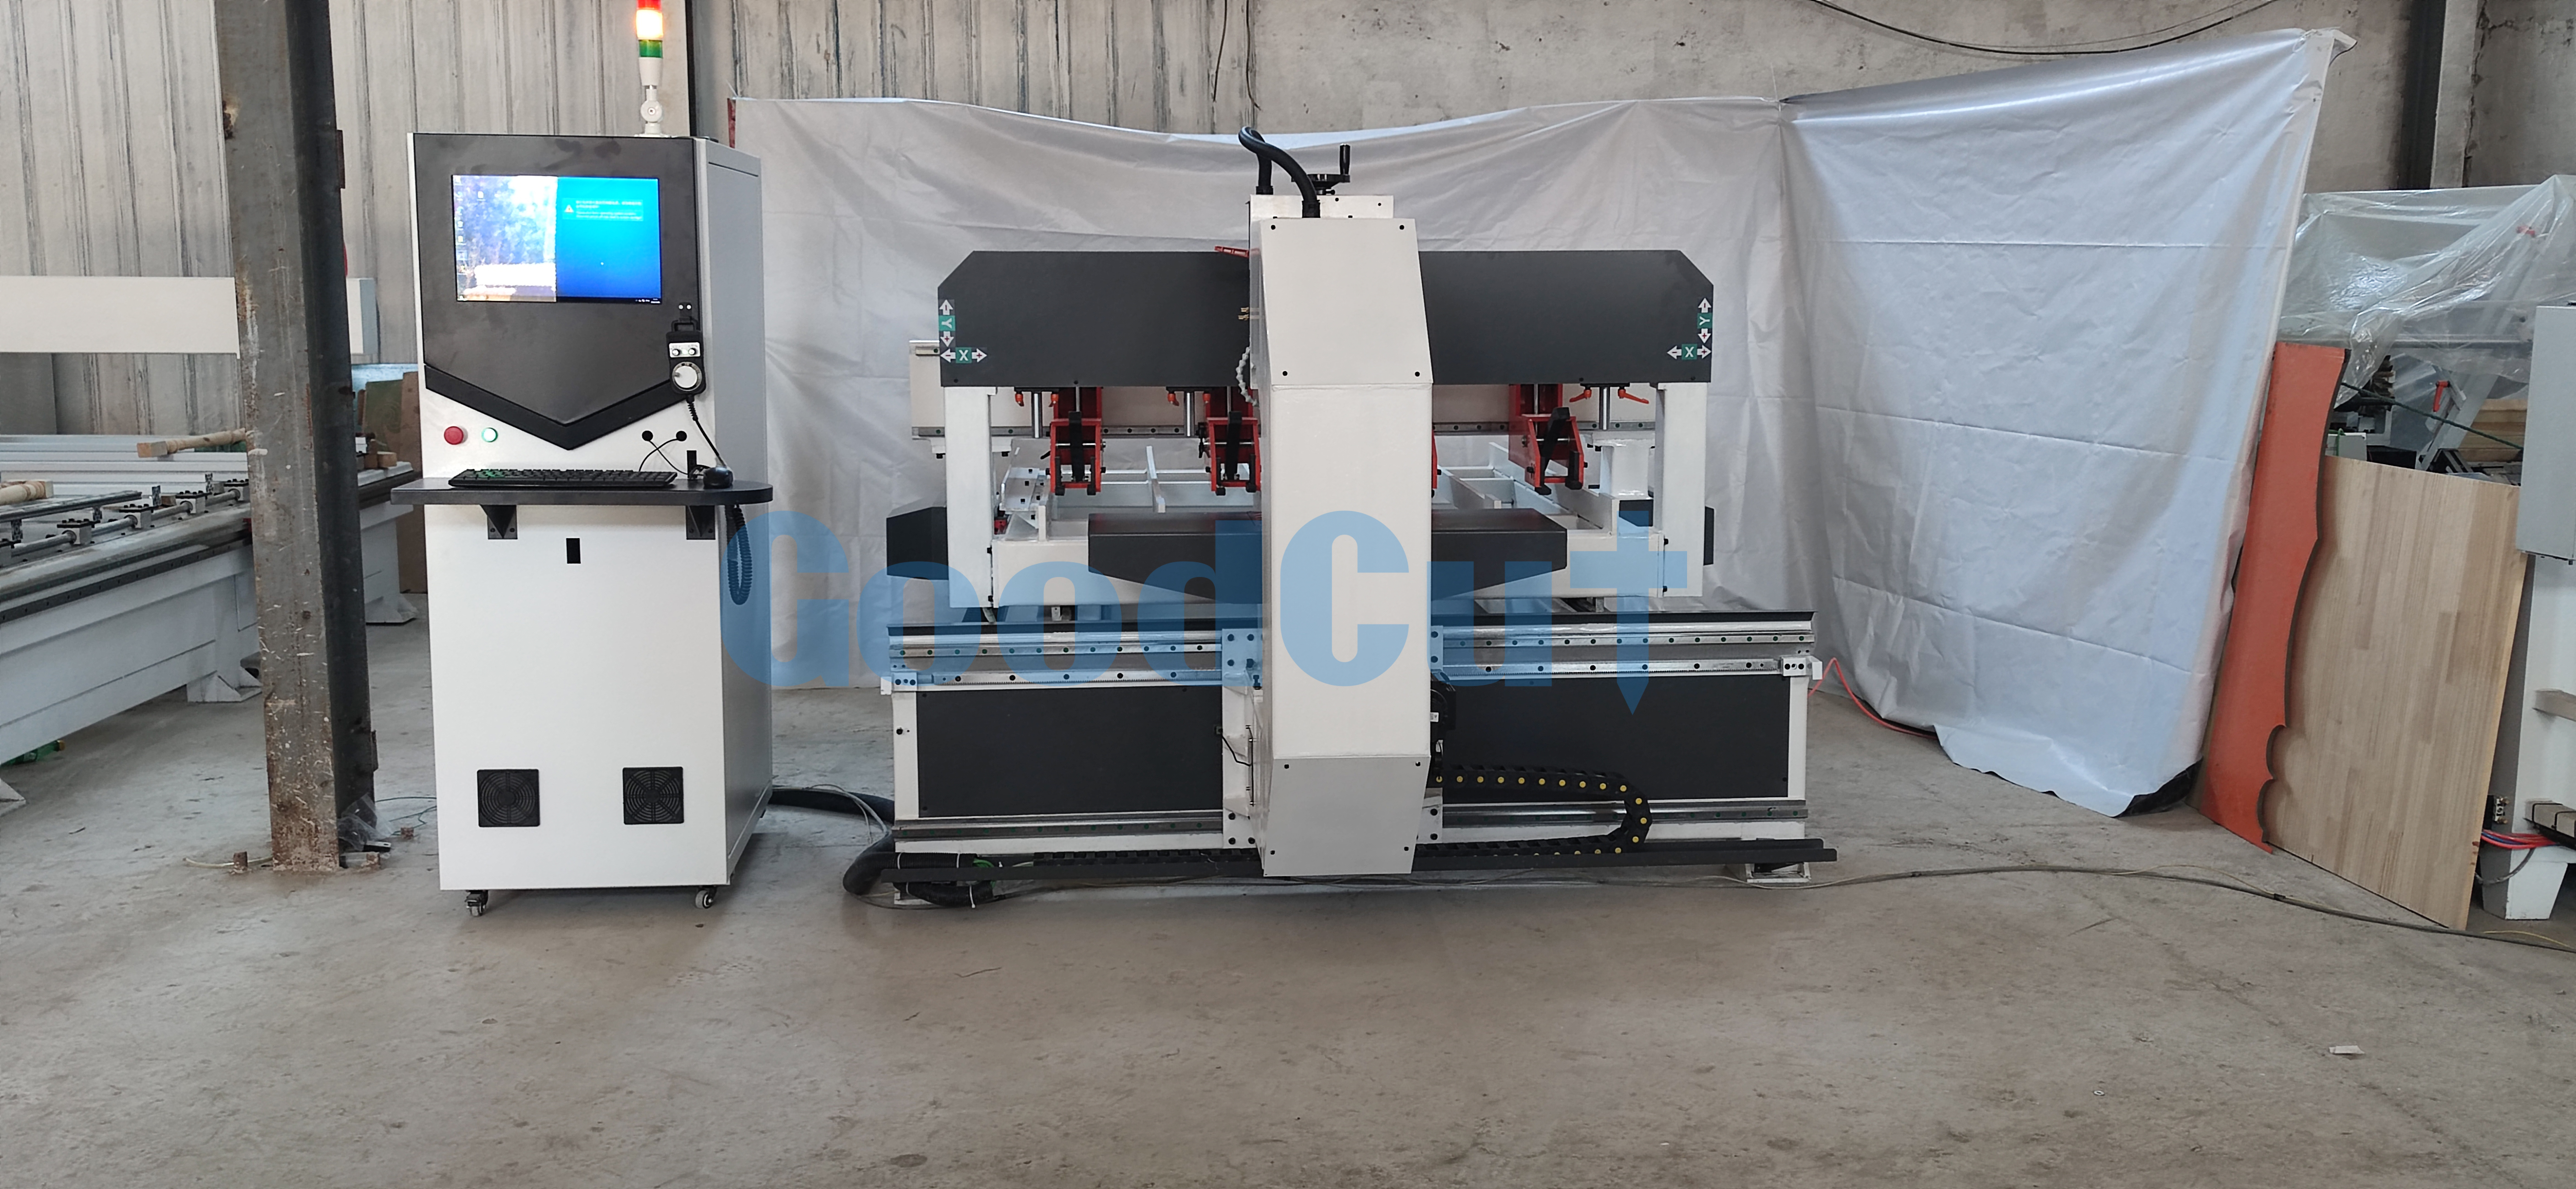 GC-SWC Solid Wood Cutting Machine for Solid Wood Furniture Production